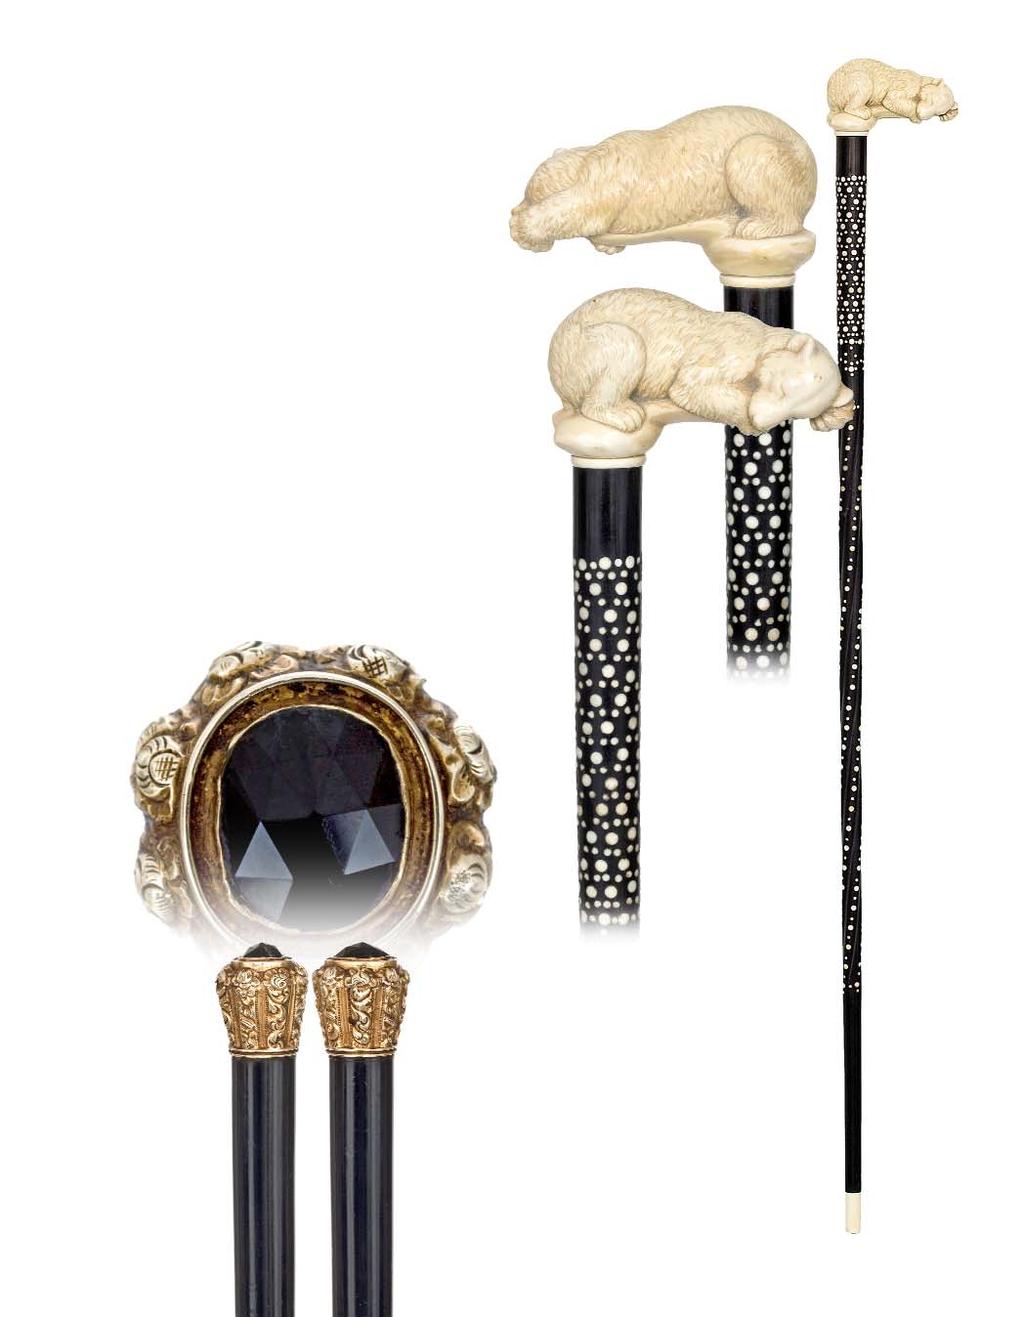 39. Spectacular Ivory Bear Cane English, 19th Century-A large ivory slumbering bear handle on an ebony shaft carved with a twist and studded with ivory dot inlay and fitted with an ivory collar and